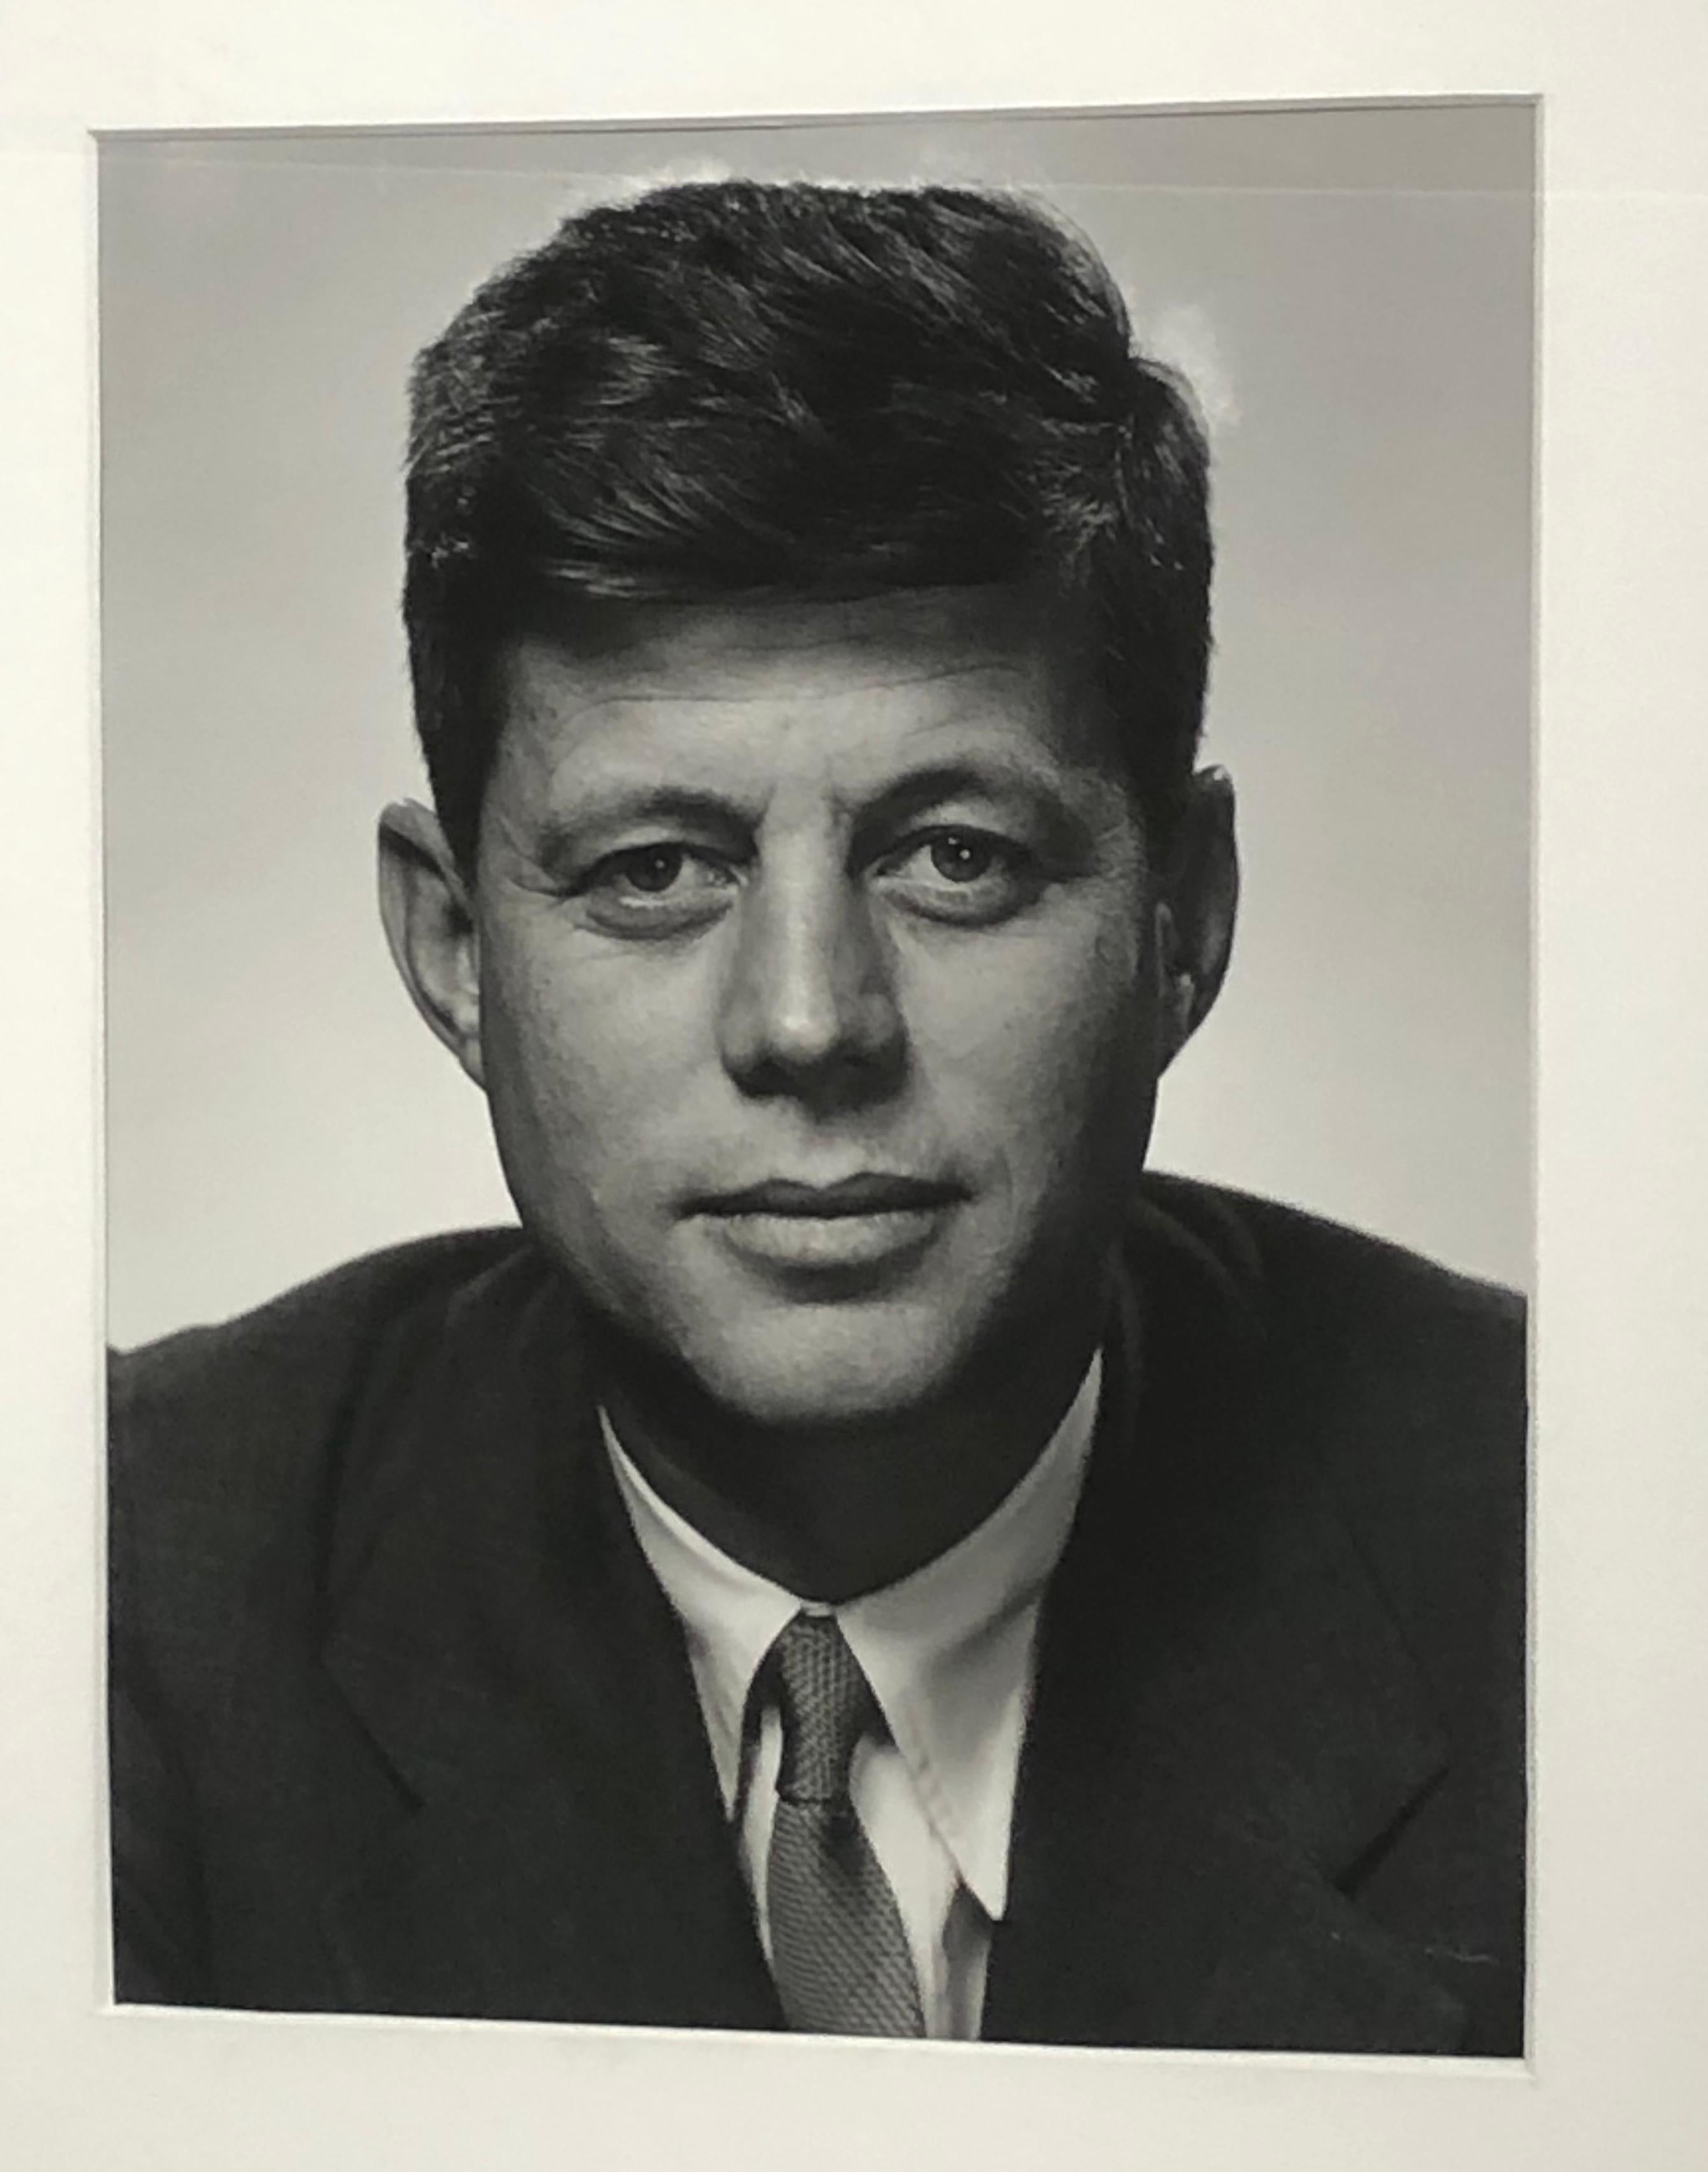 Philippe Halsman silver Gelatin John f Kennedy
Photograph circa 1952 printed 1978. Stamped and raised signature. Lower right. Behind UV glass and with metal frame .photograph size is 11 x 14 framed measurements below .Stamped to back 6/500.